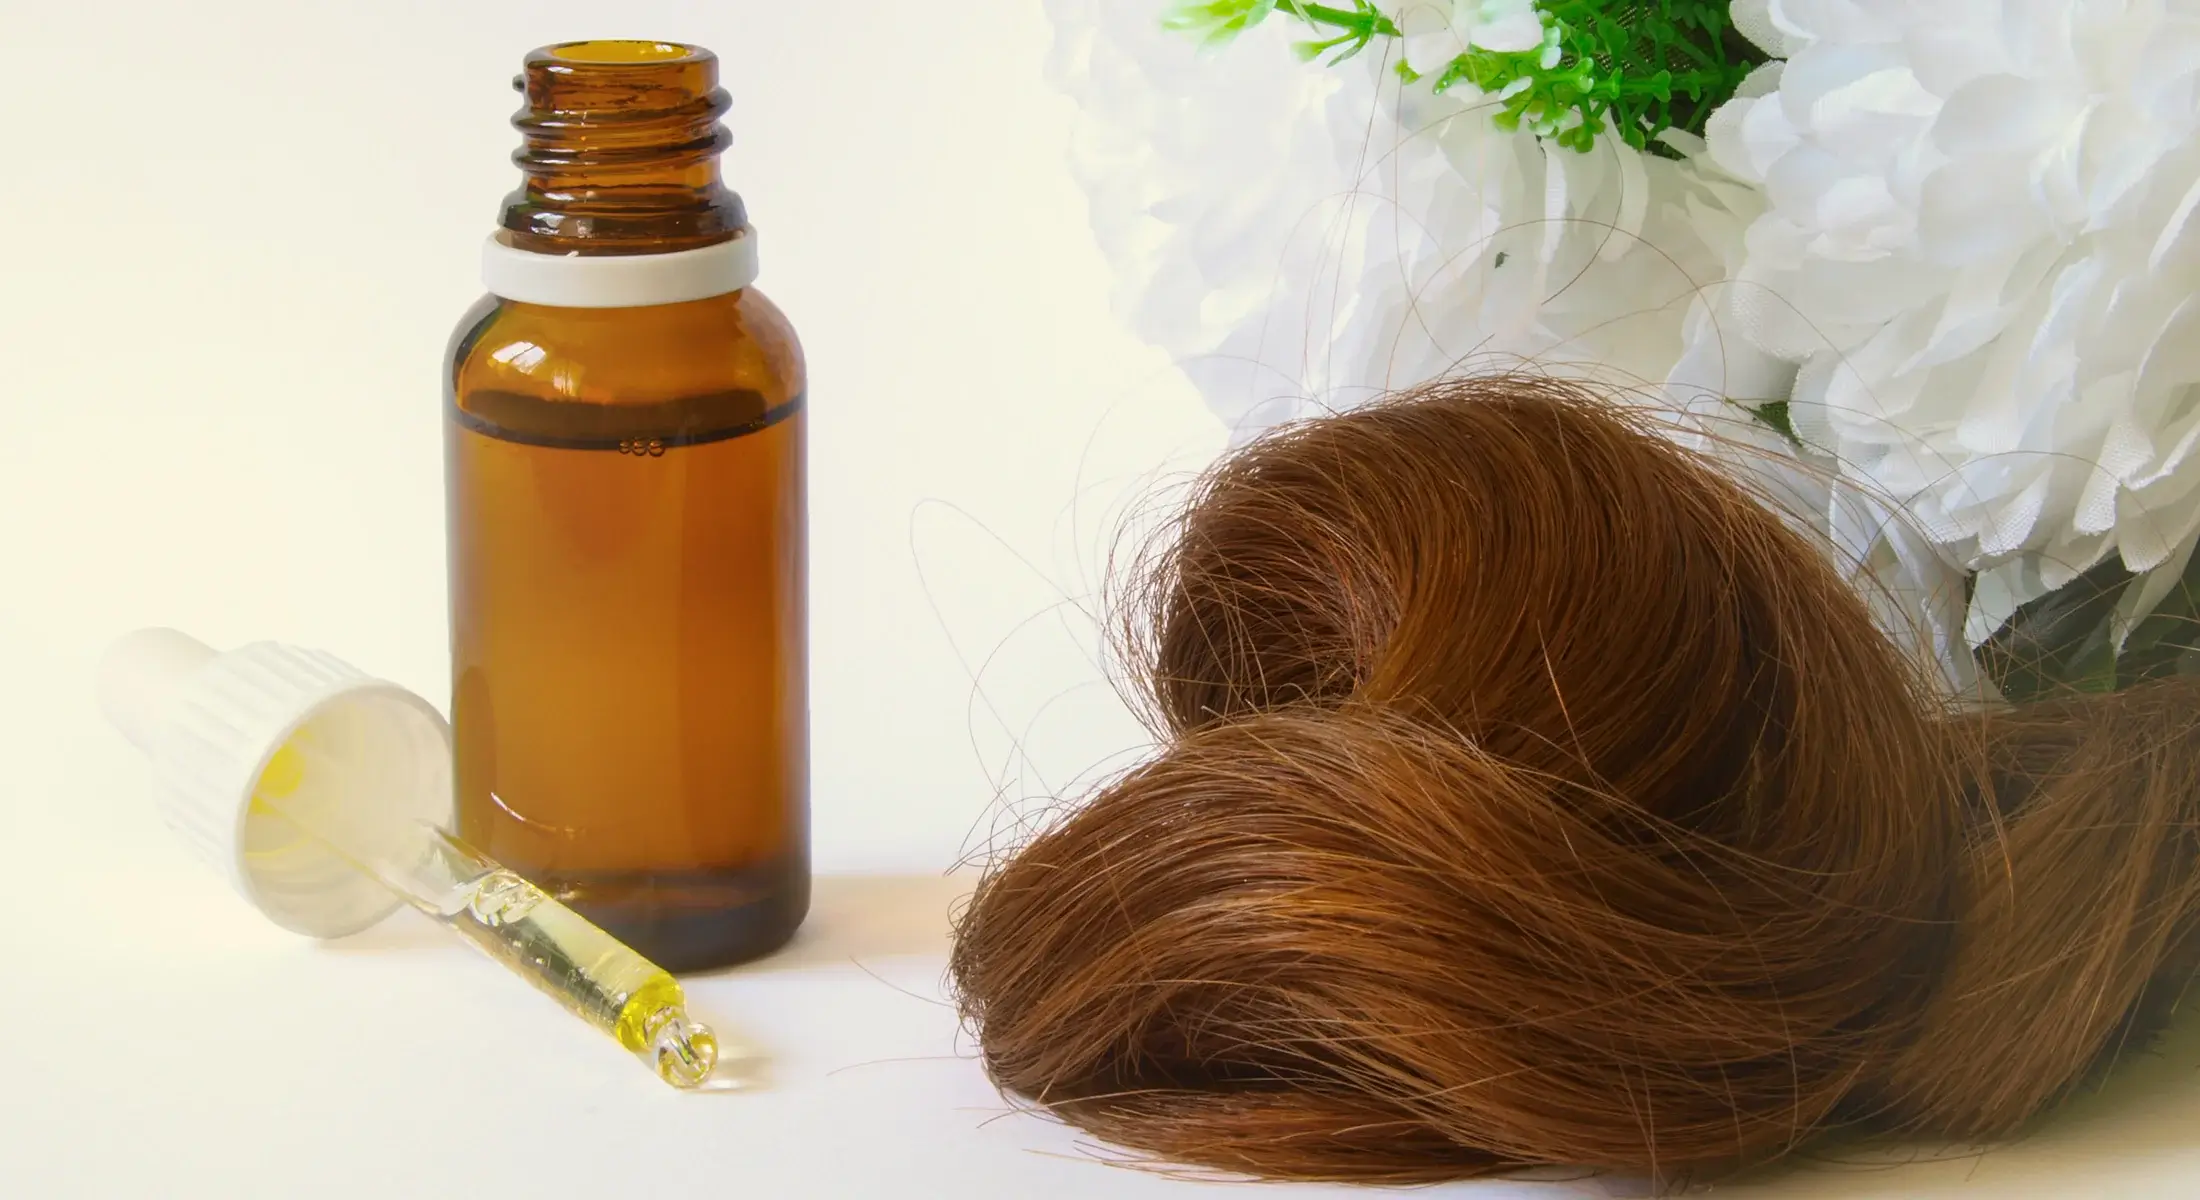 Things To Keep In Mind While Using Argan Oil For Dandruff